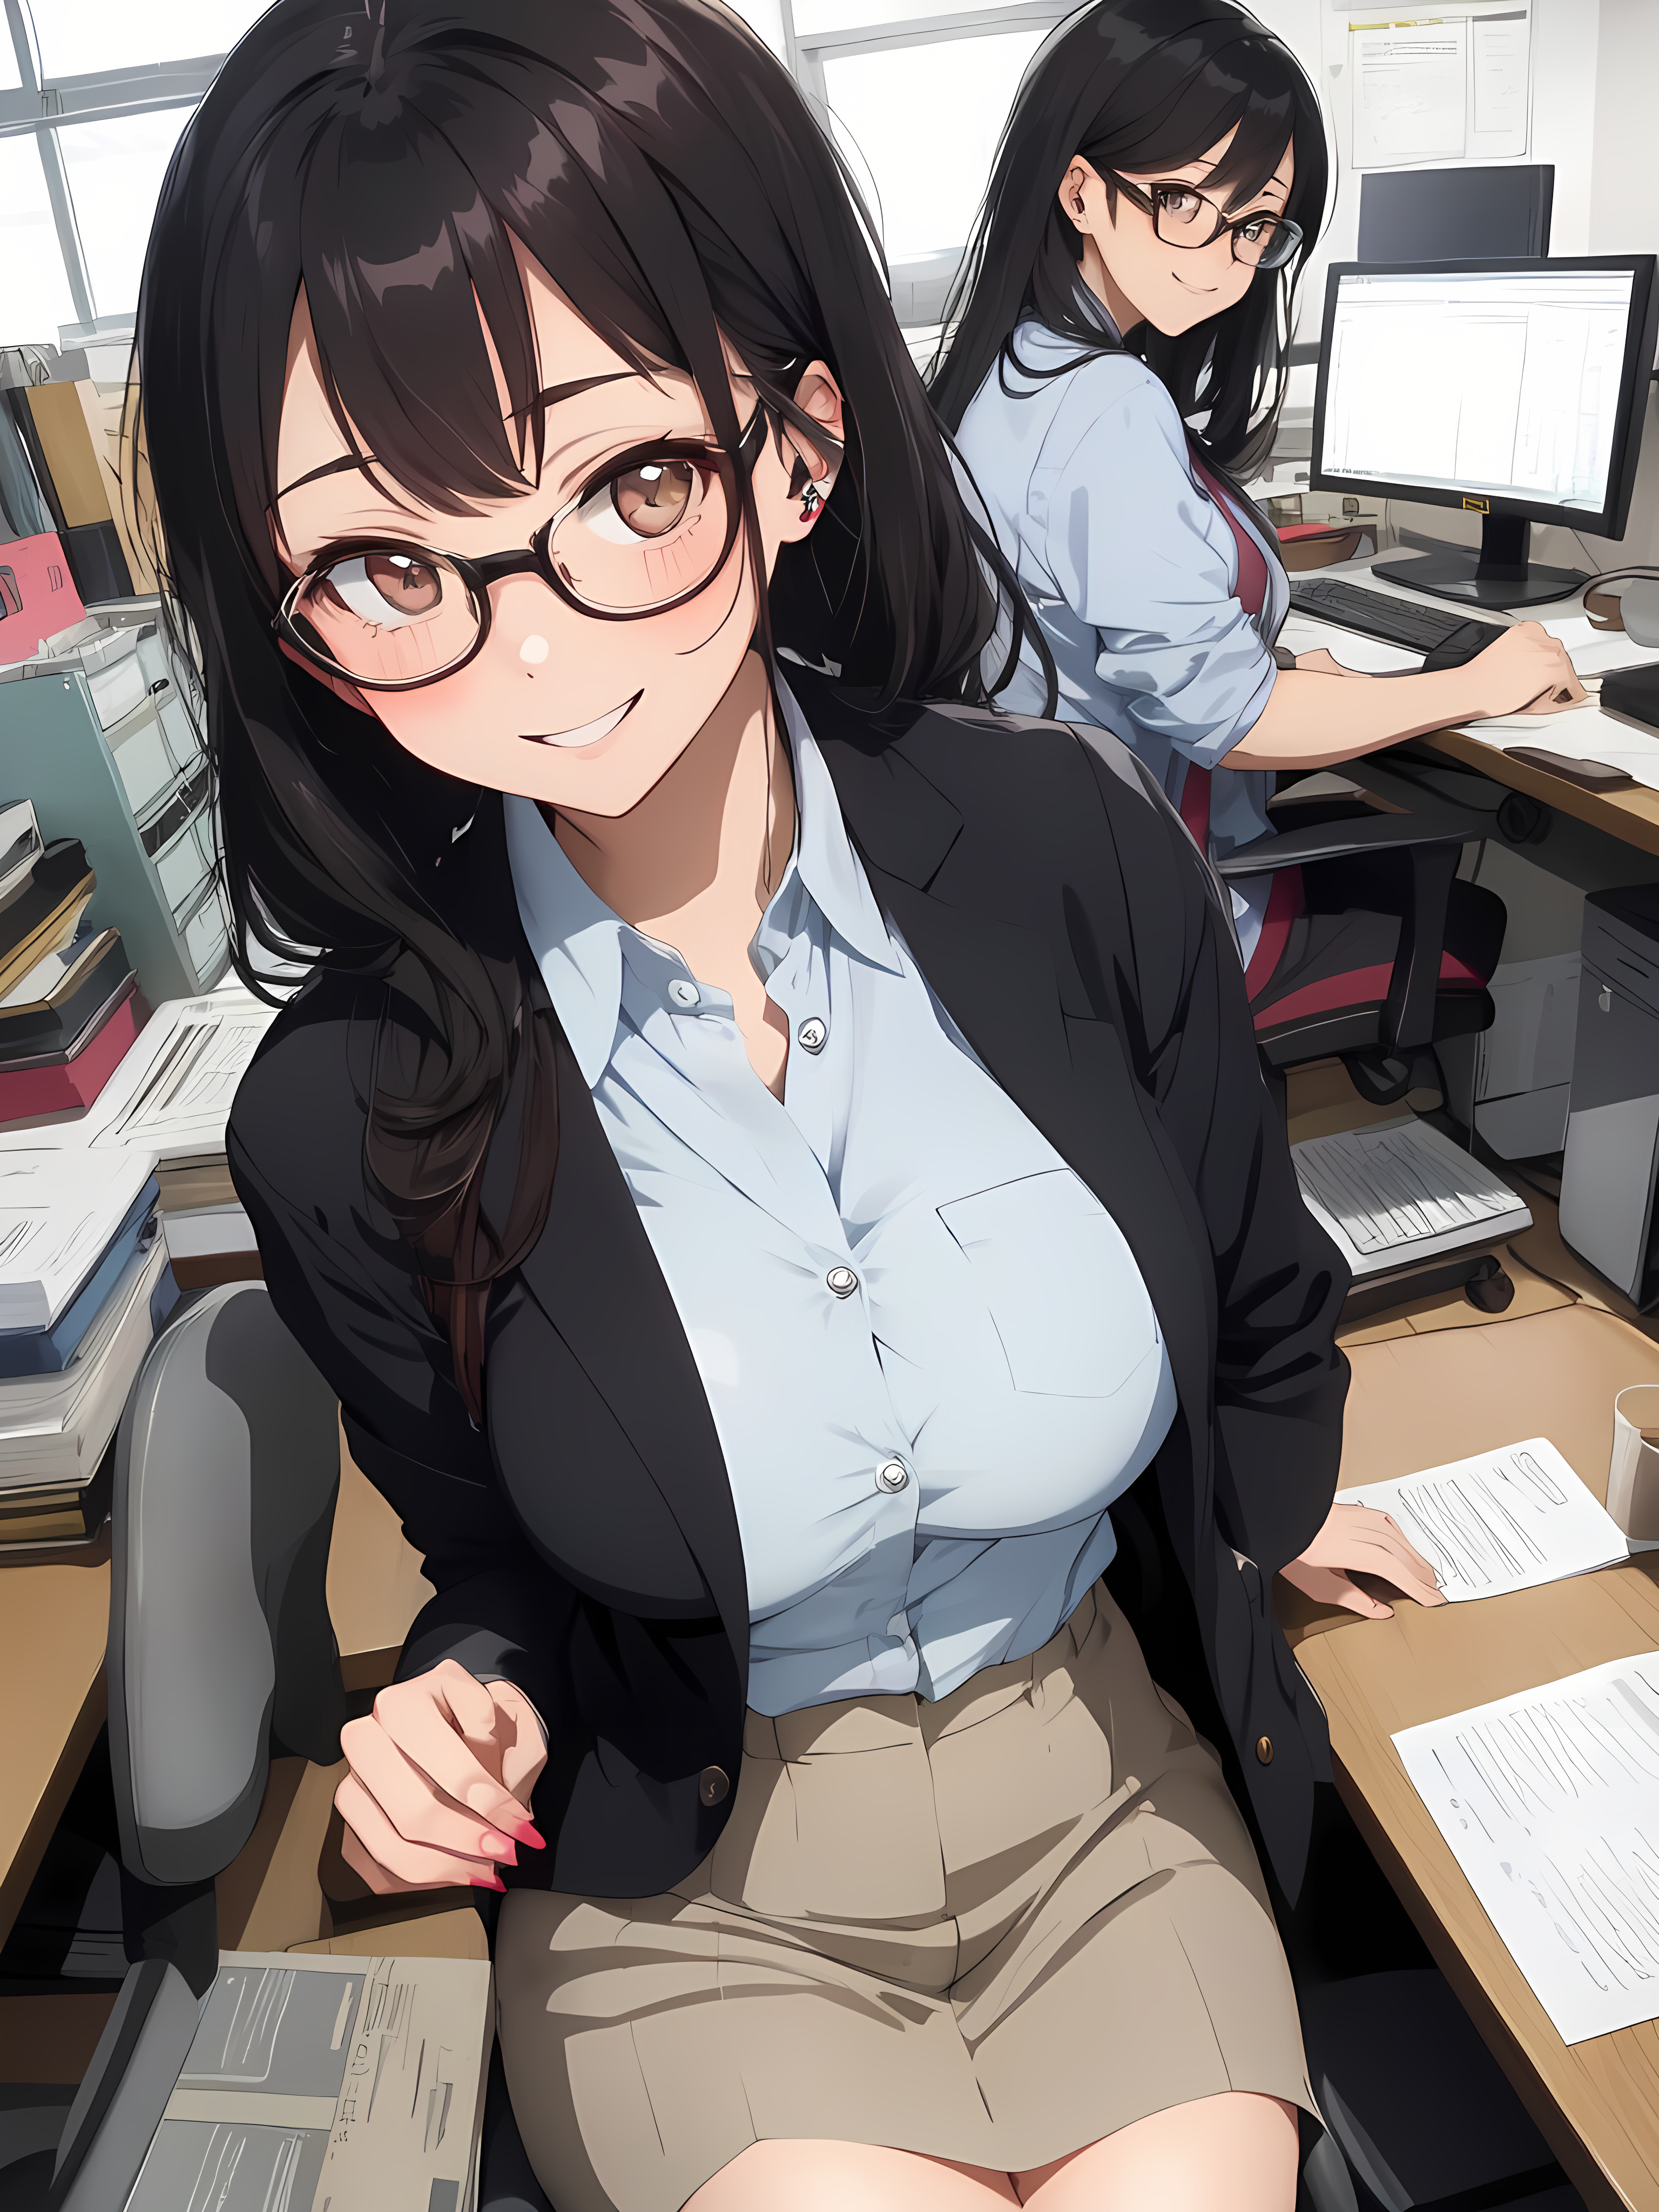 Anime 3072x4096 AI art anime girls office girl women office two women looking at viewer blushing smiling black hair long hair glasses portrait display computer